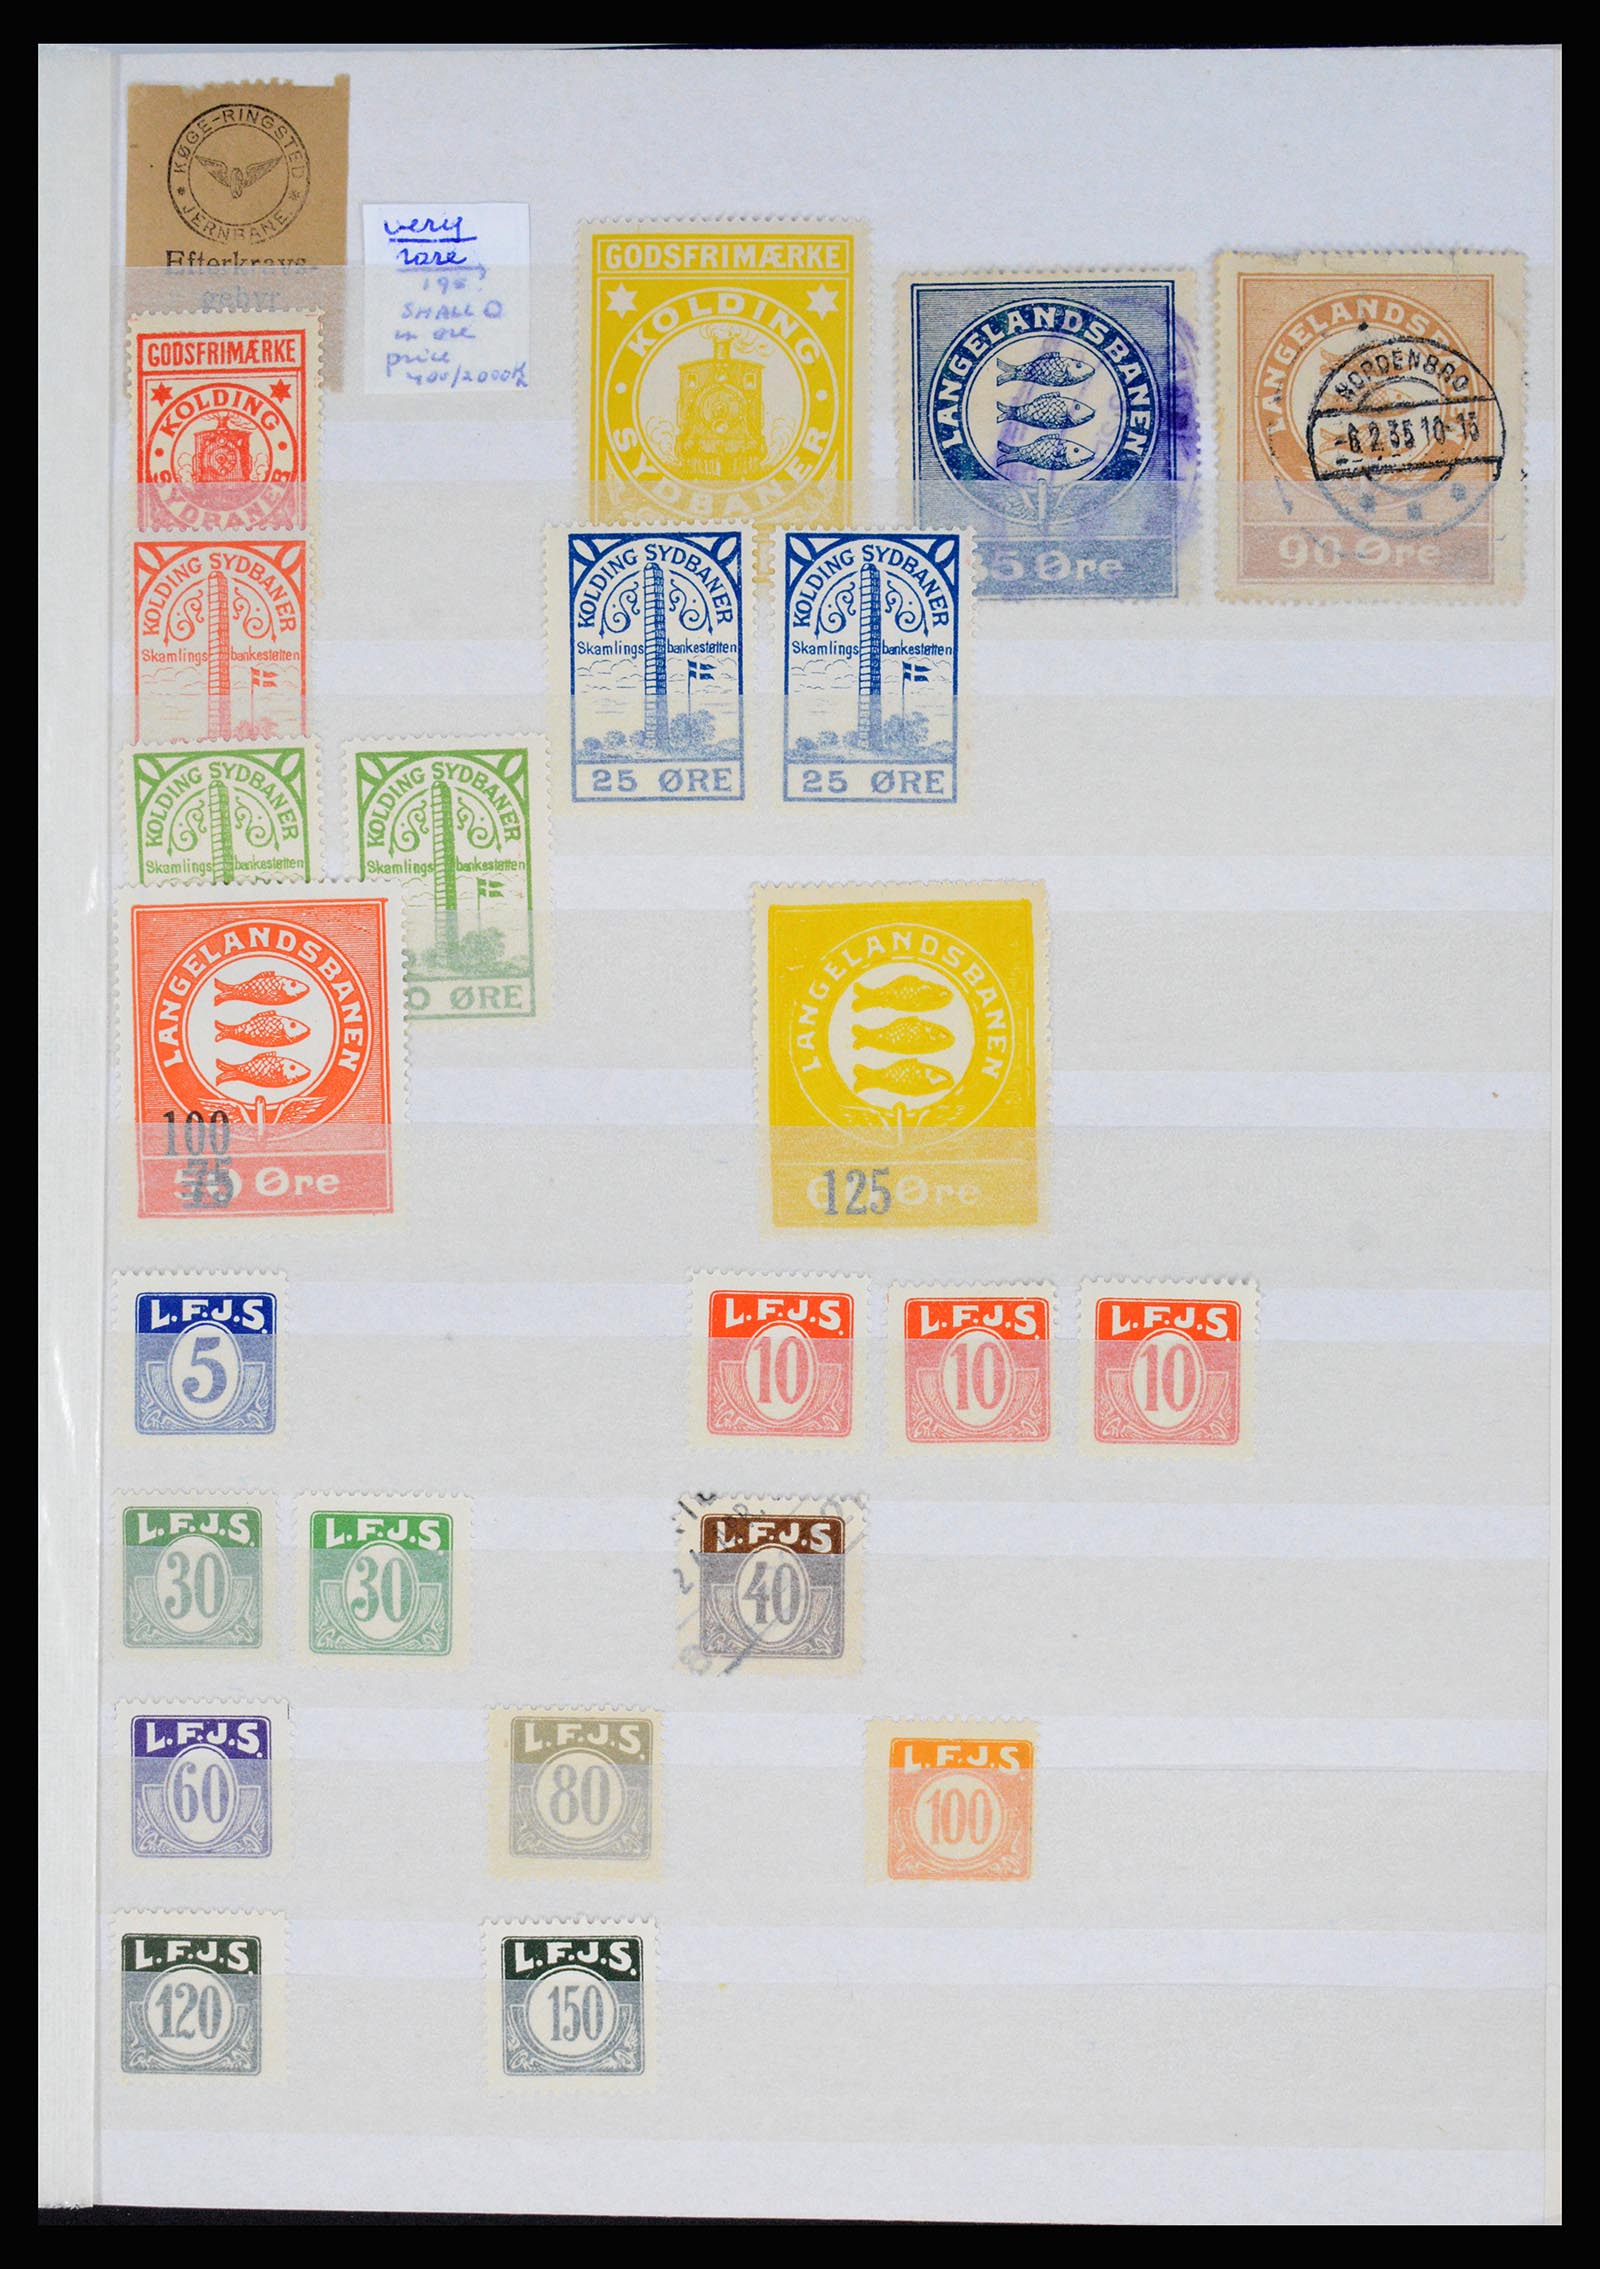 36982 035 - Stamp collection 36982 Denmark railroad stamps.